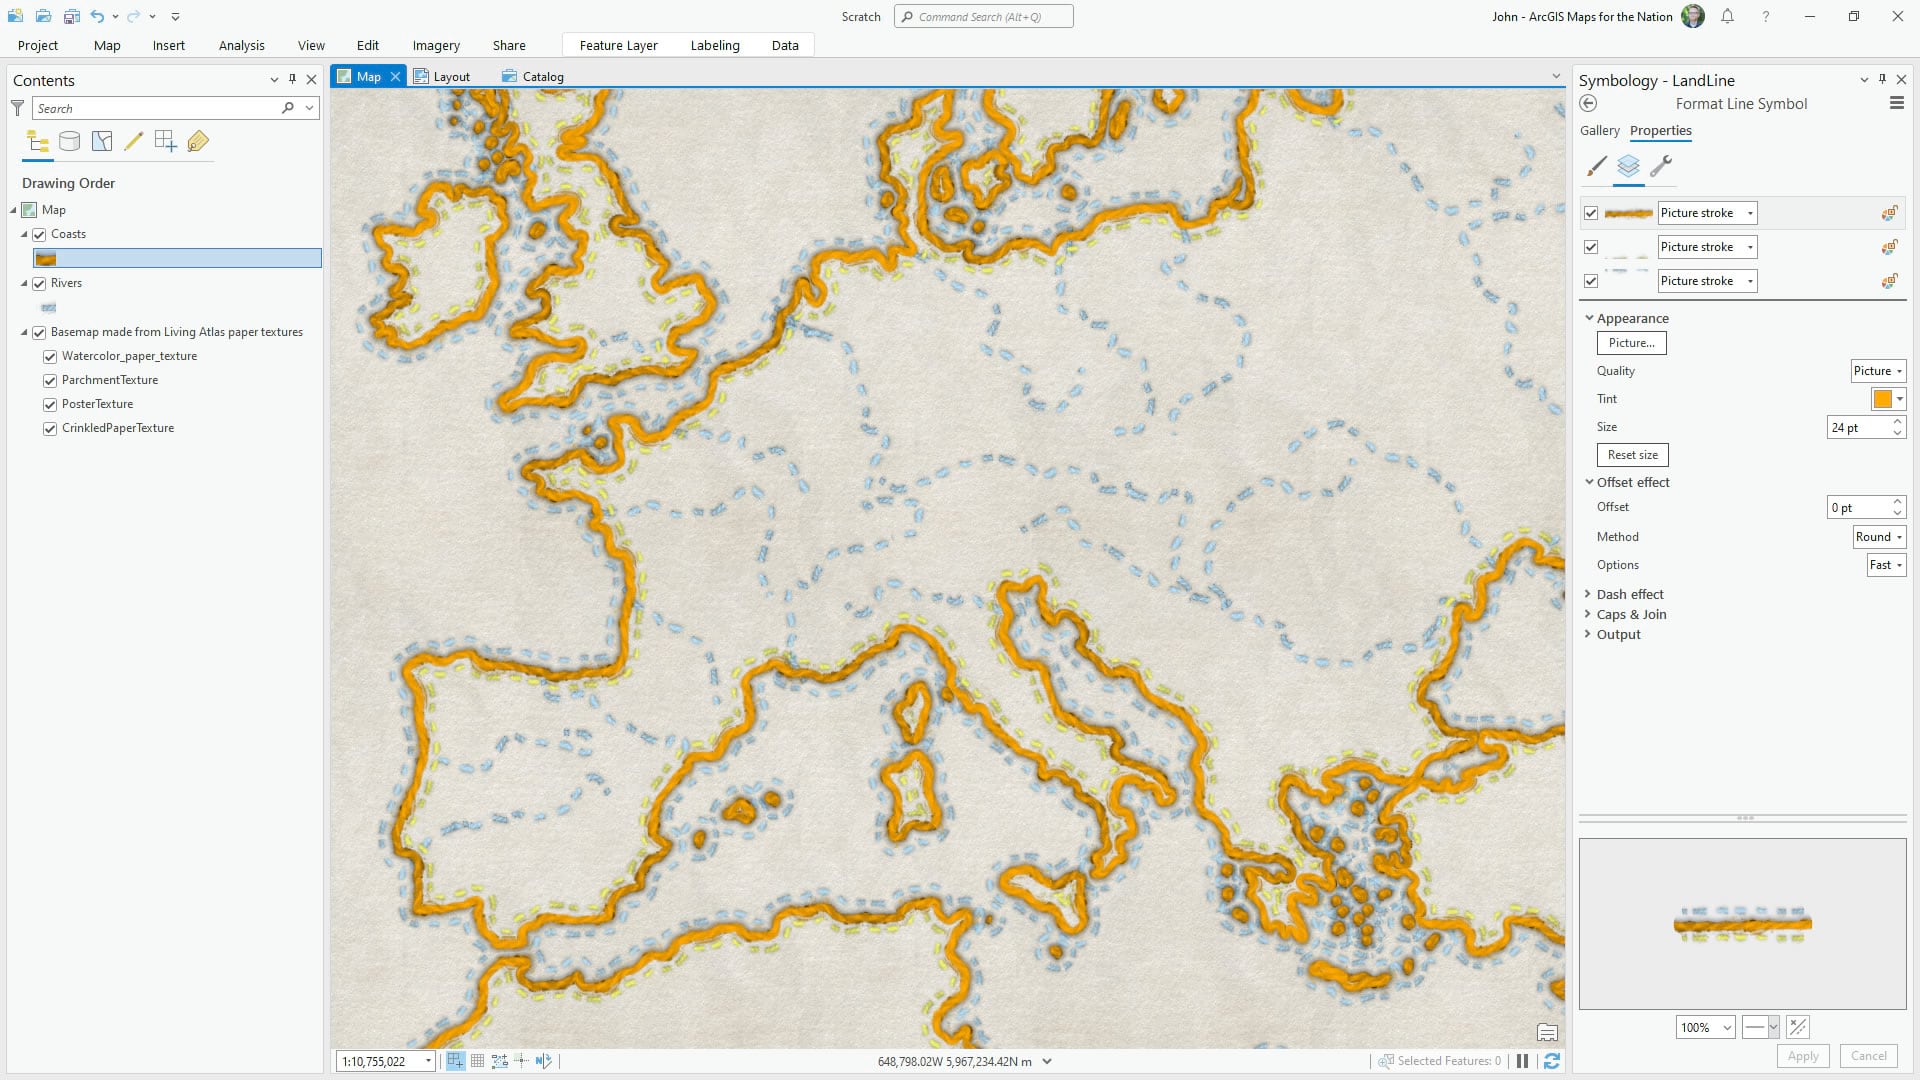 Picture strokes in ArcGIS Pro can look like real material maps.